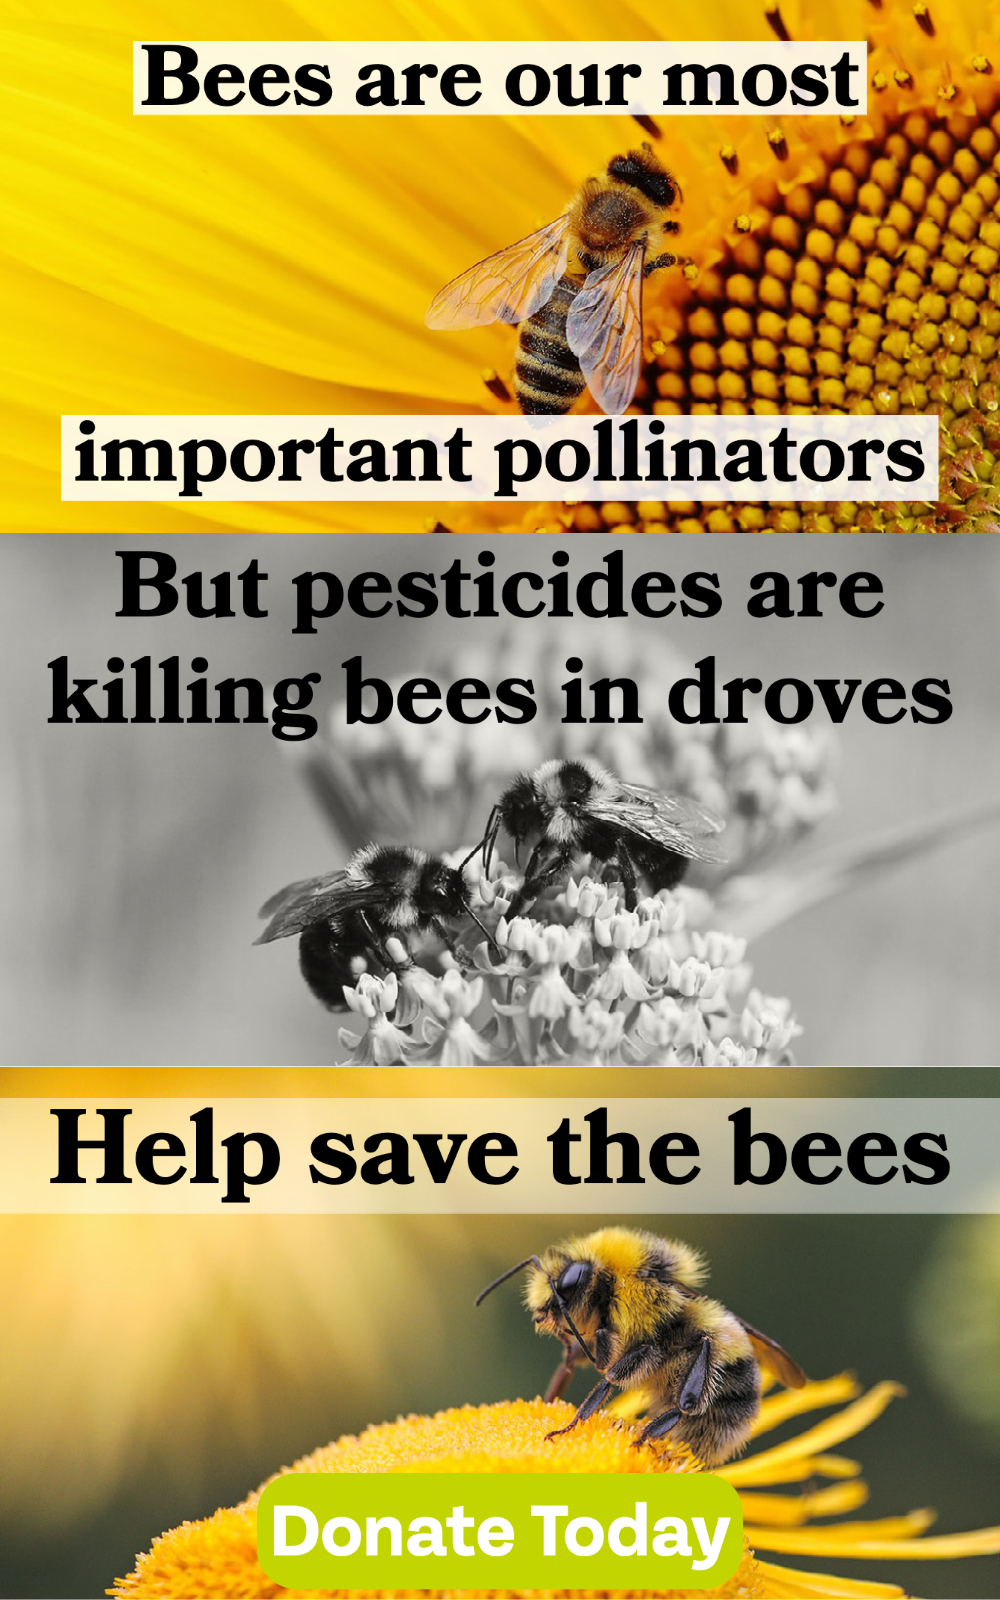 Help save the bees